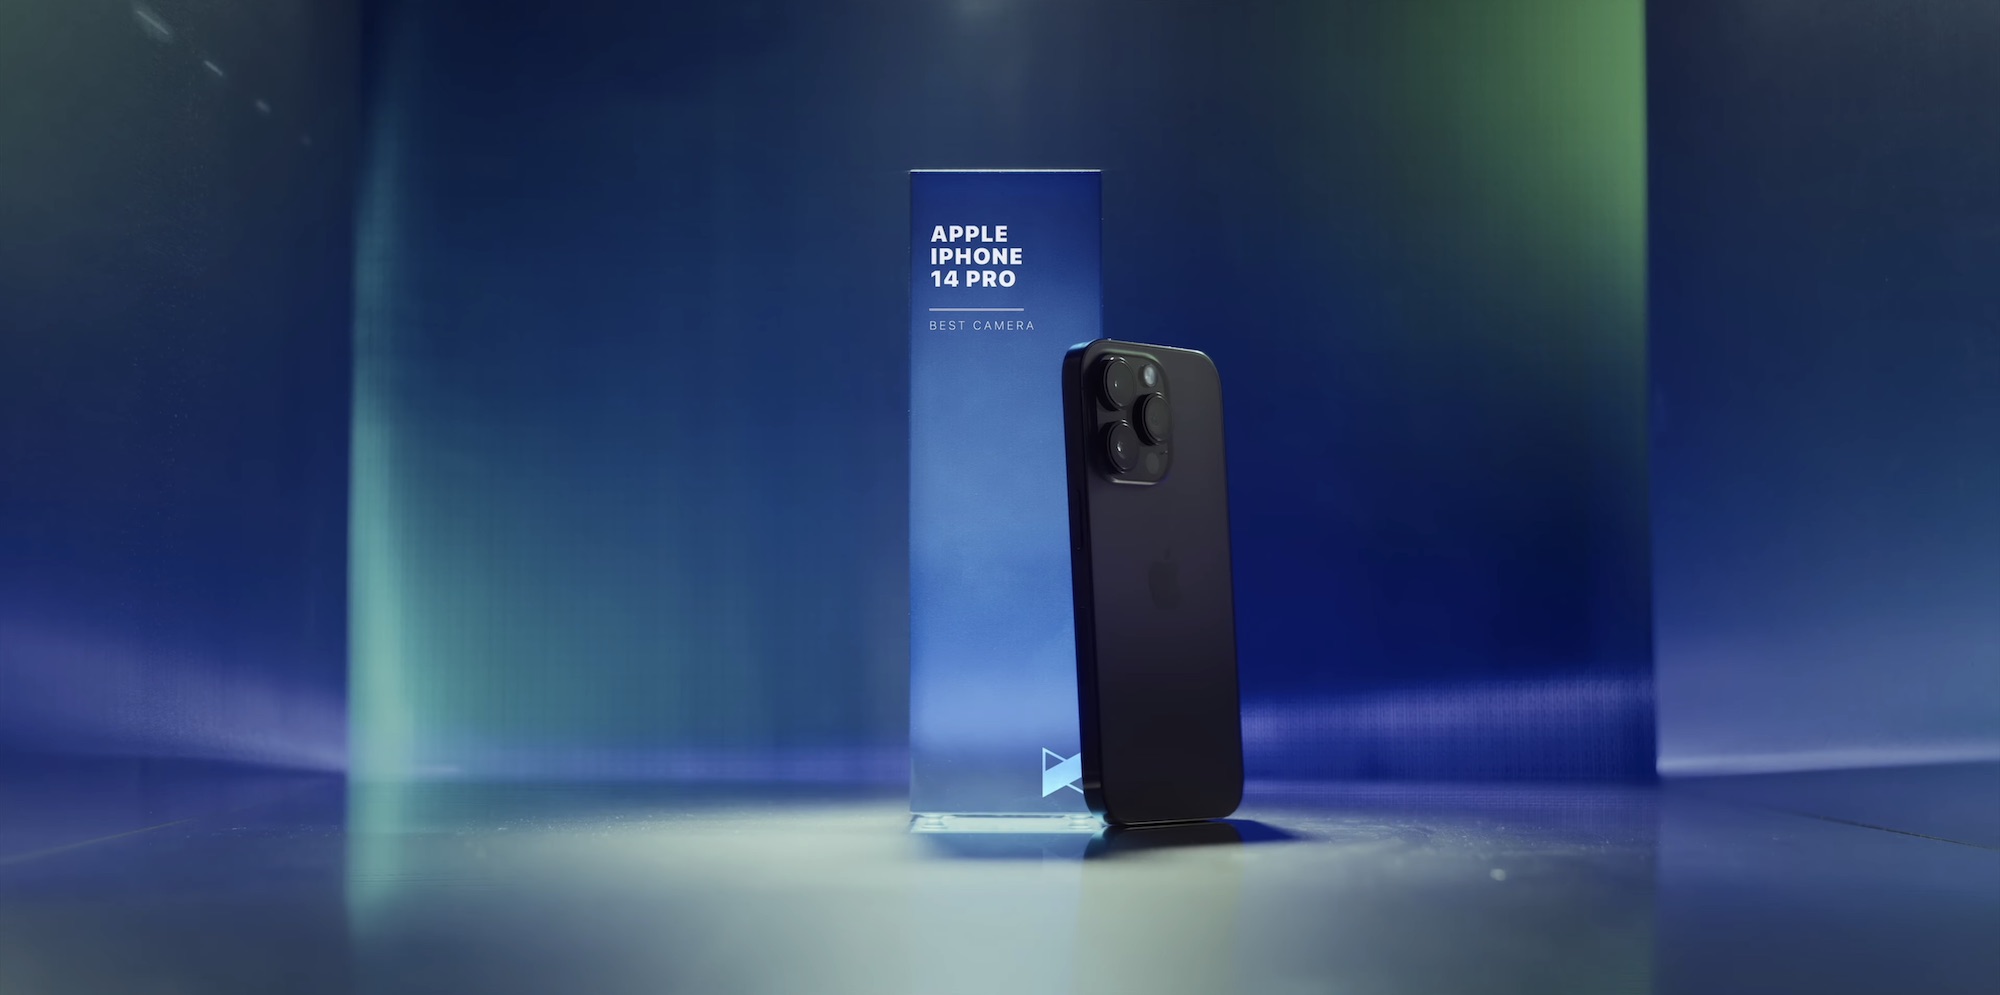 iPhone loses the spotlight to its competitors in MKBHD's Smartphone Awards 2022